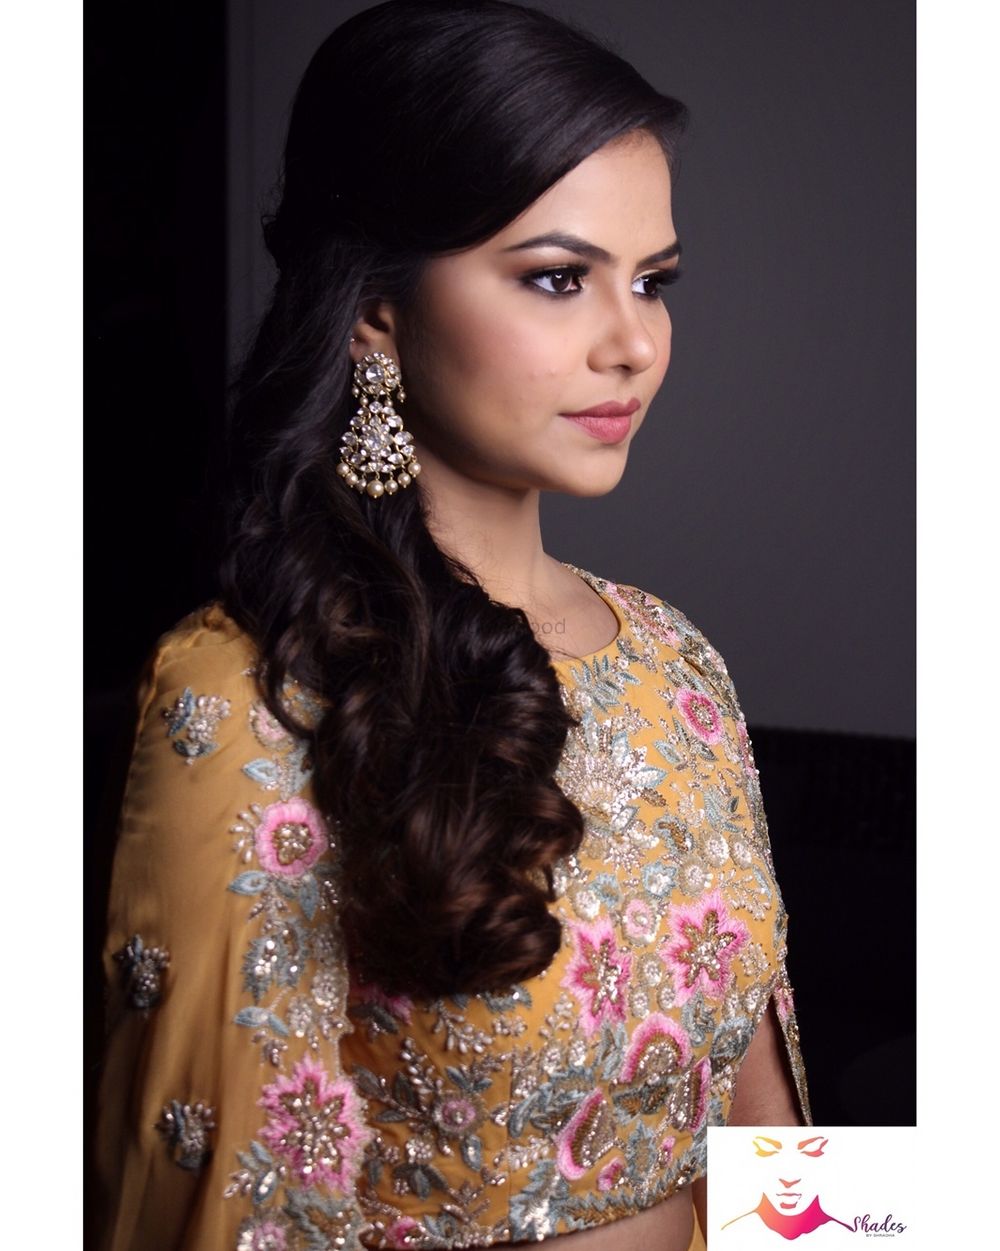 Photo From Bridal Makup - By Shades by Shradha